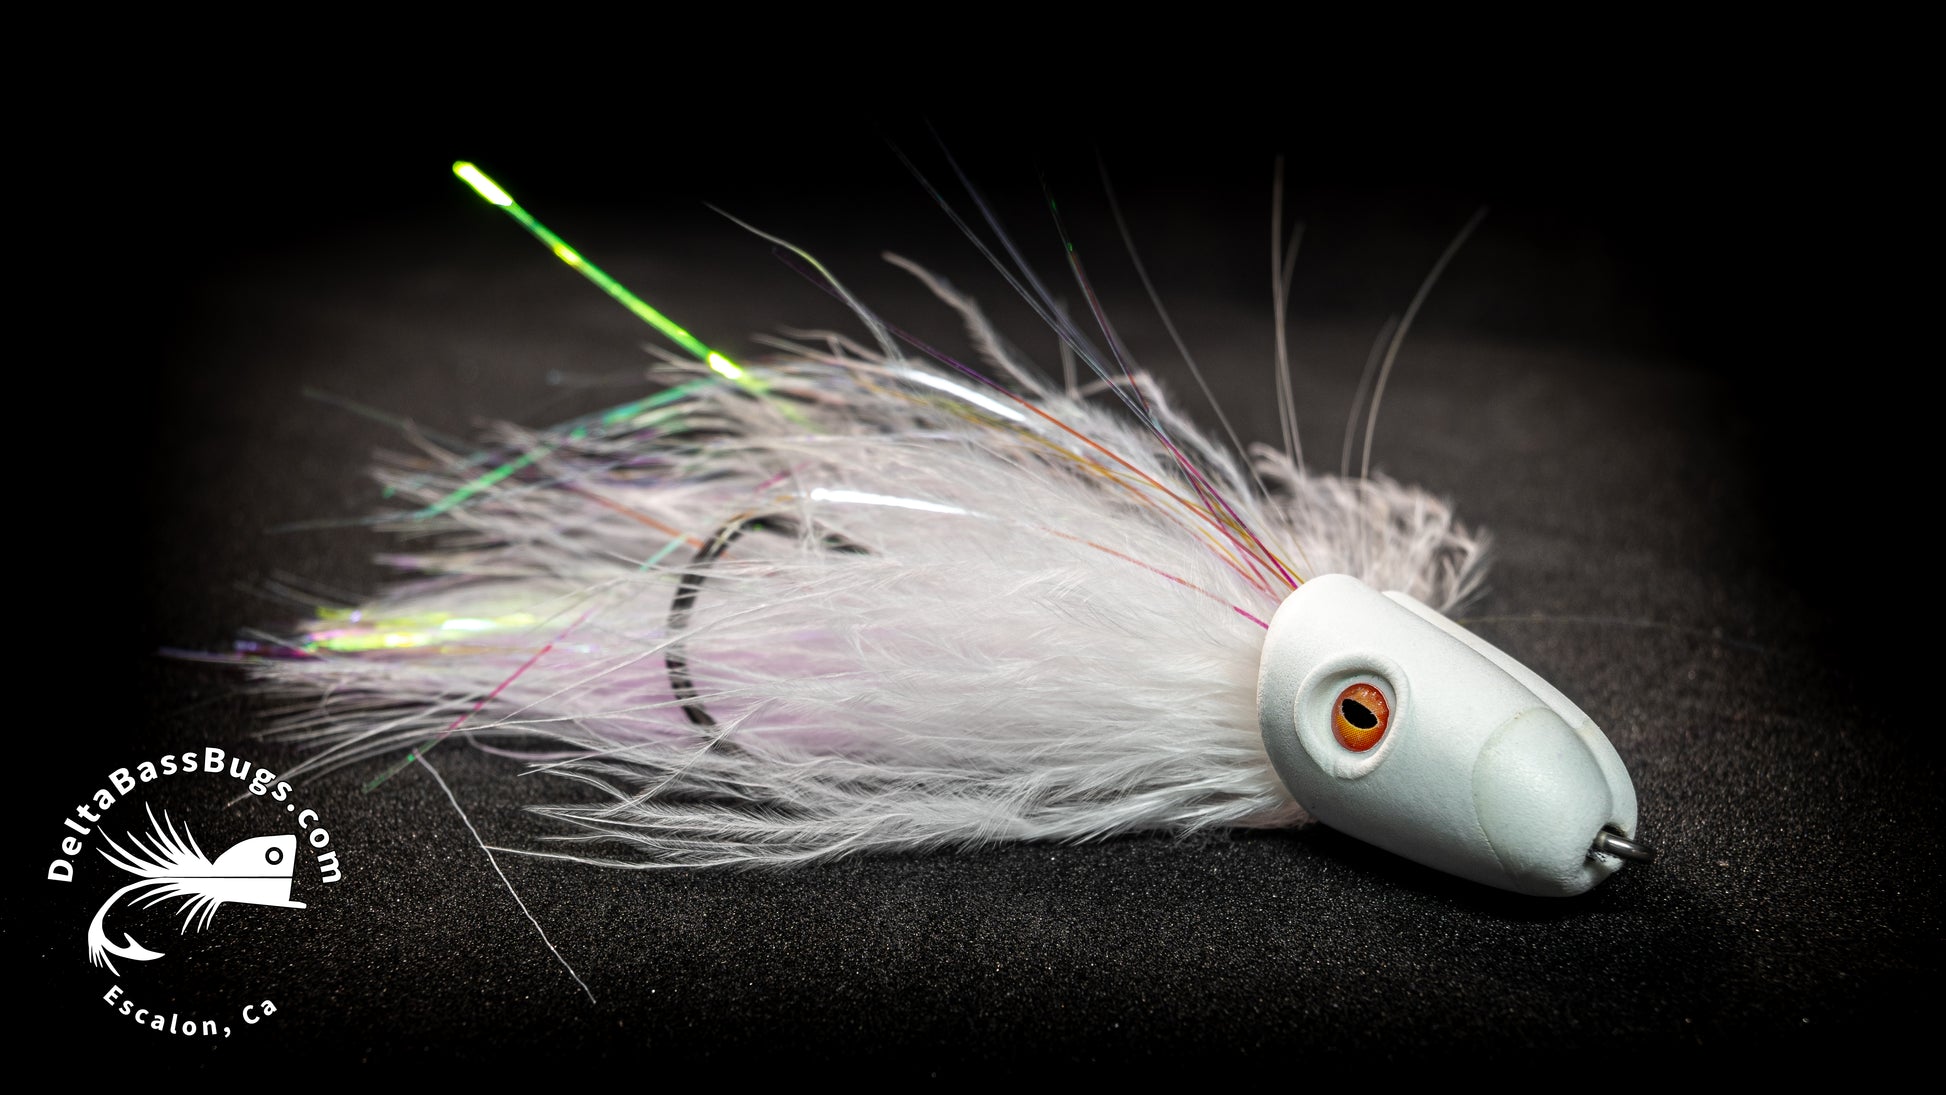 EWG Poppers and Sliders – Delta Bass Bugs